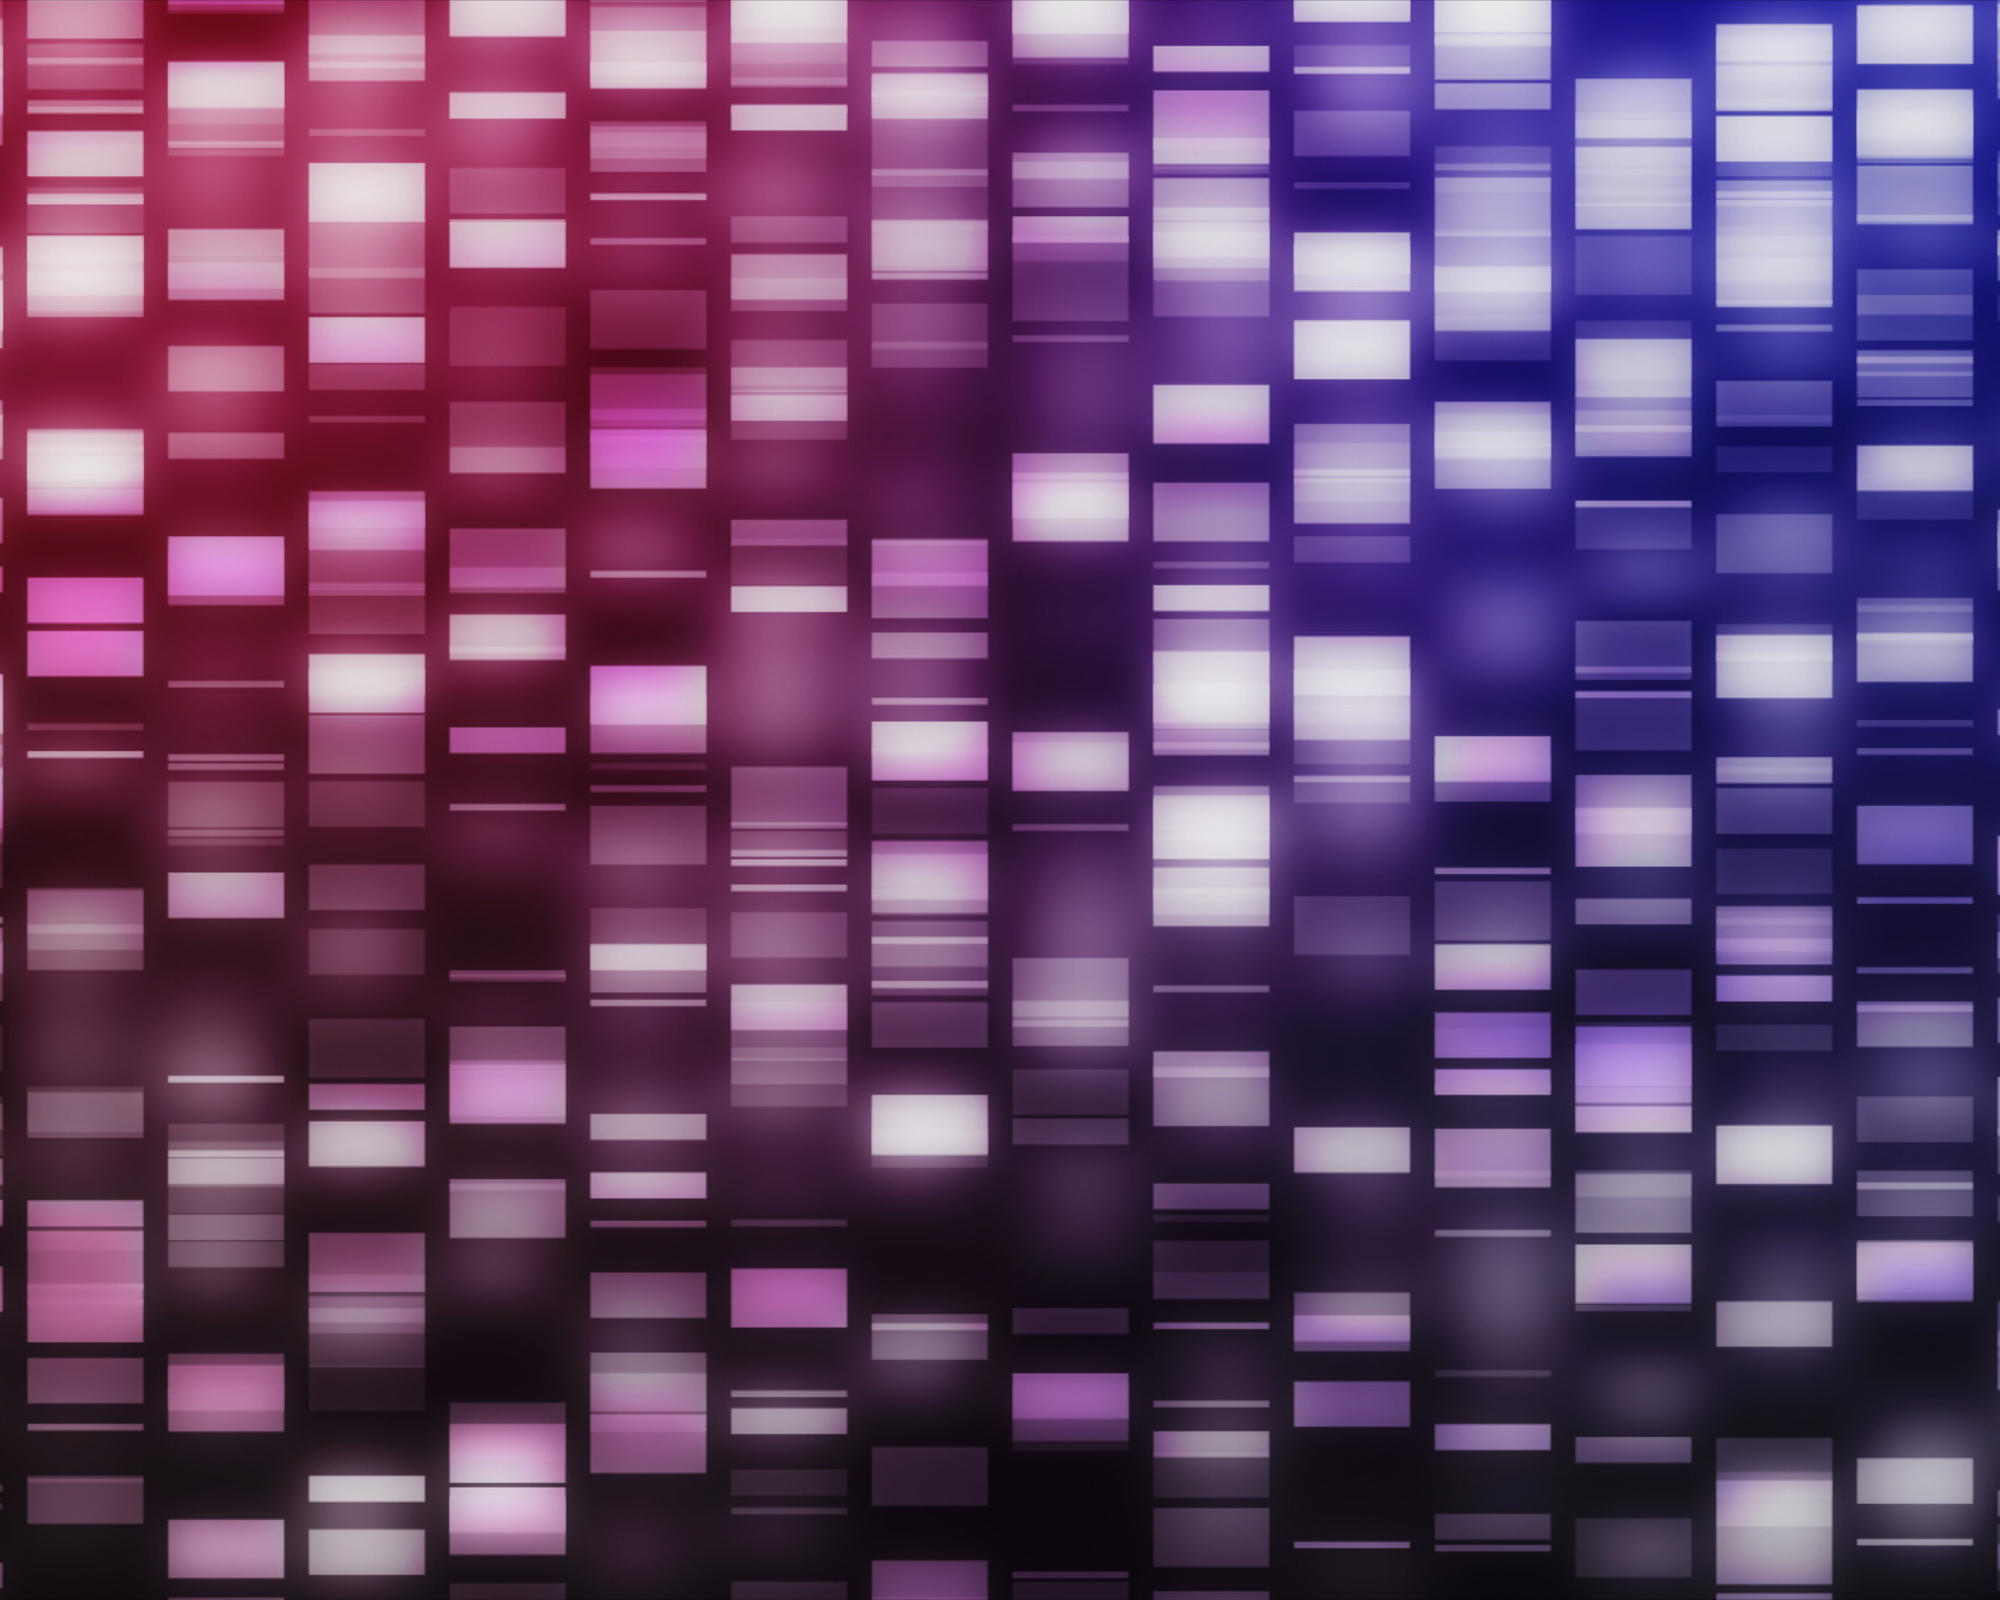 23andMe can now test for BRCA mutations. Here’s what you need to know.